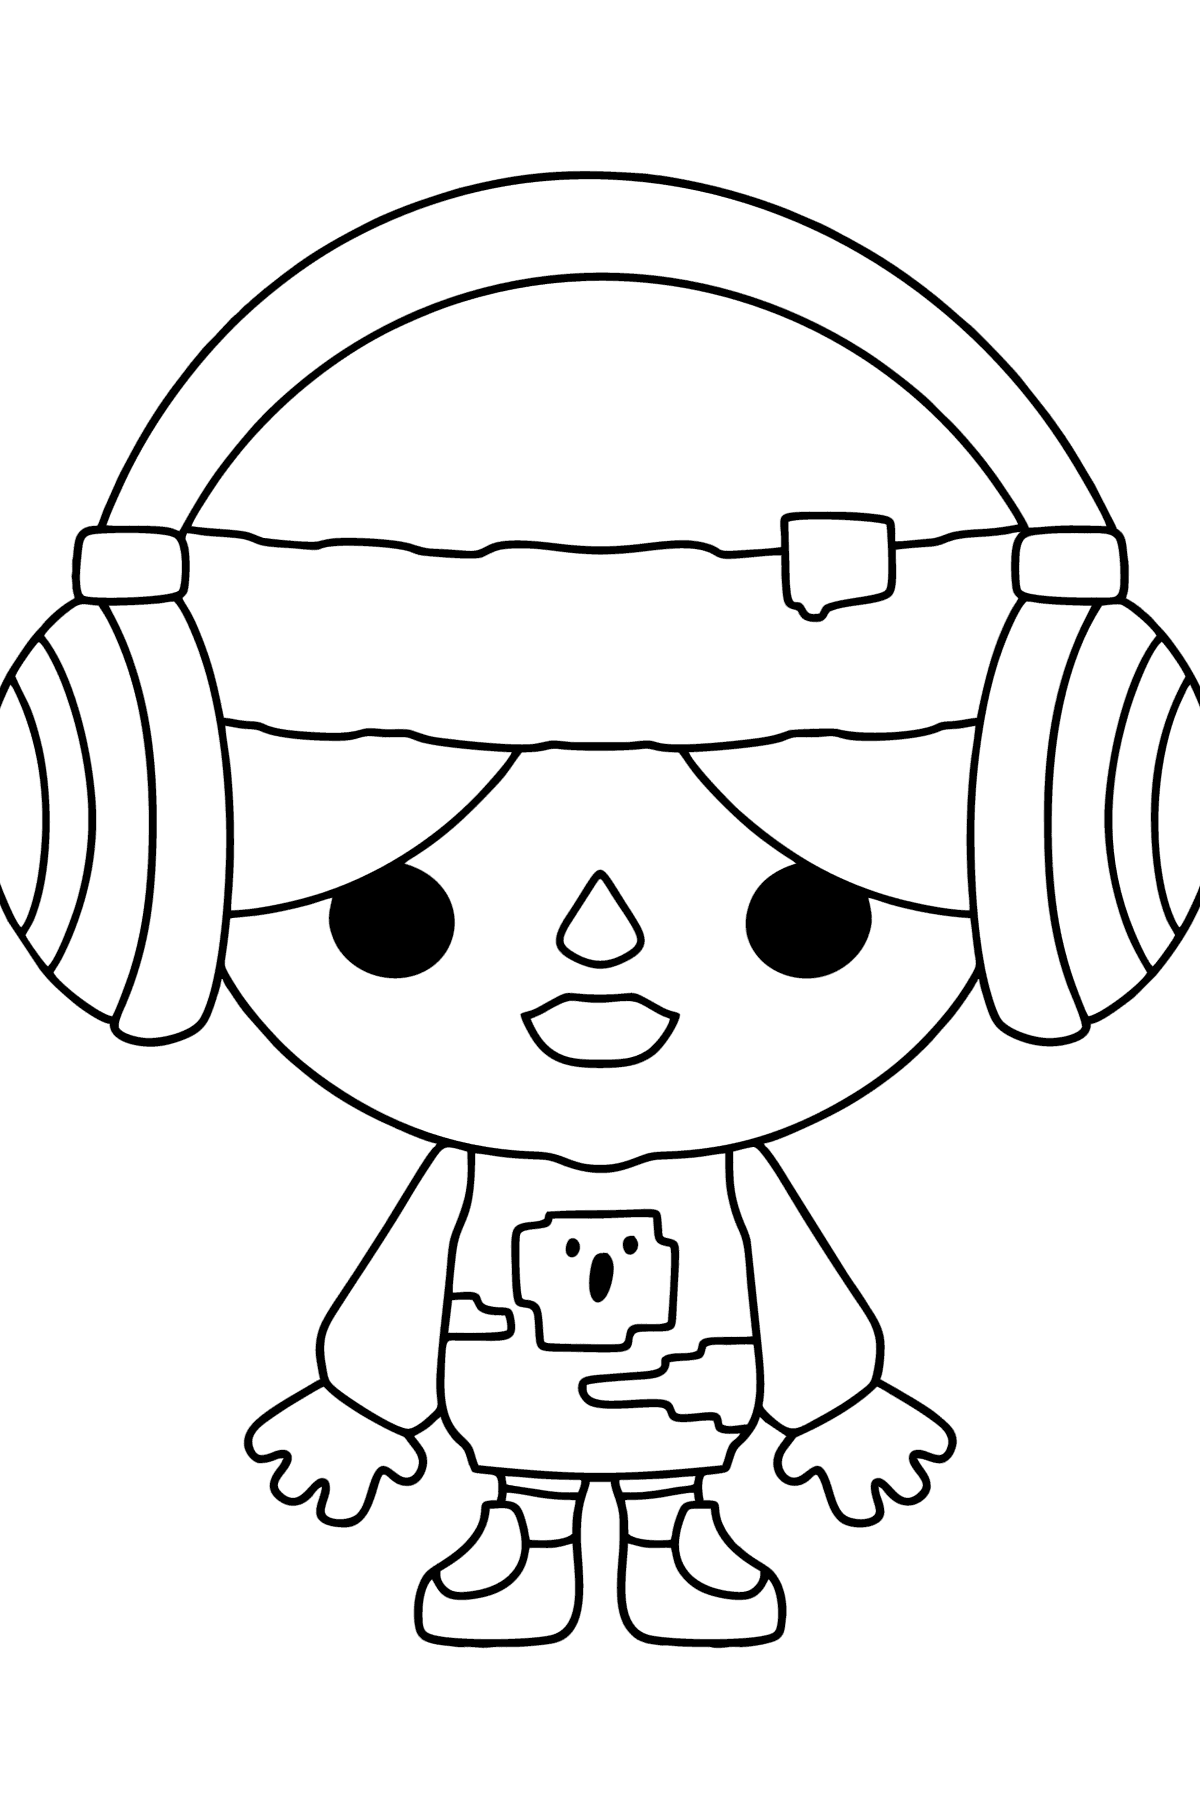 Coloring page Baby tocaboca 03 - Coloring Pages for Kids